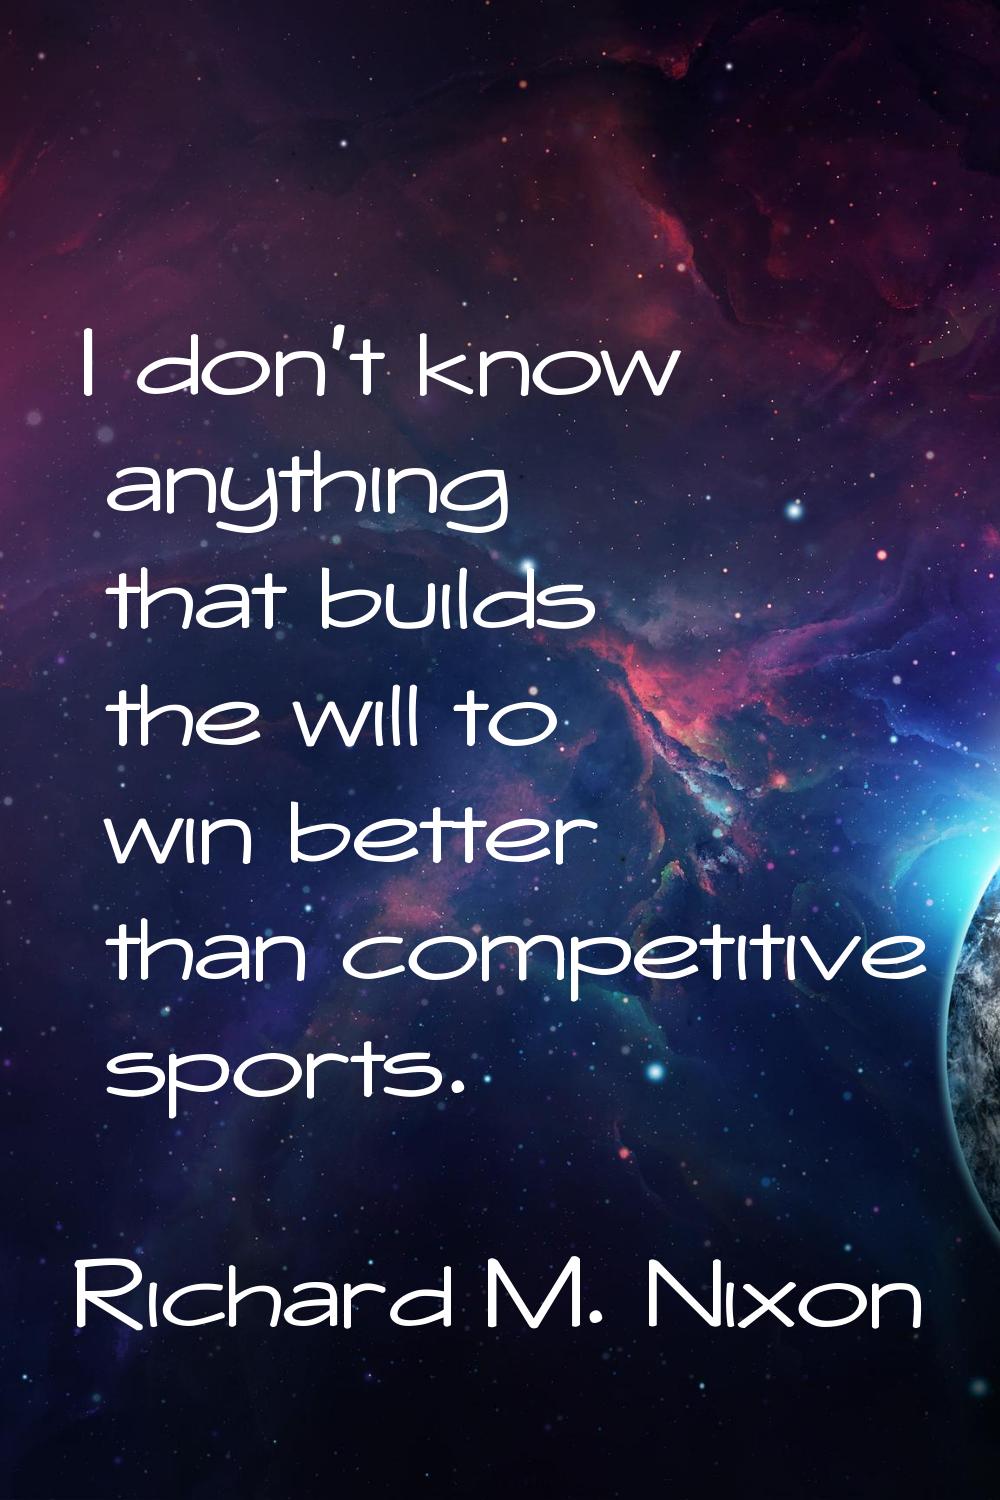 I don't know anything that builds the will to win better than competitive sports.